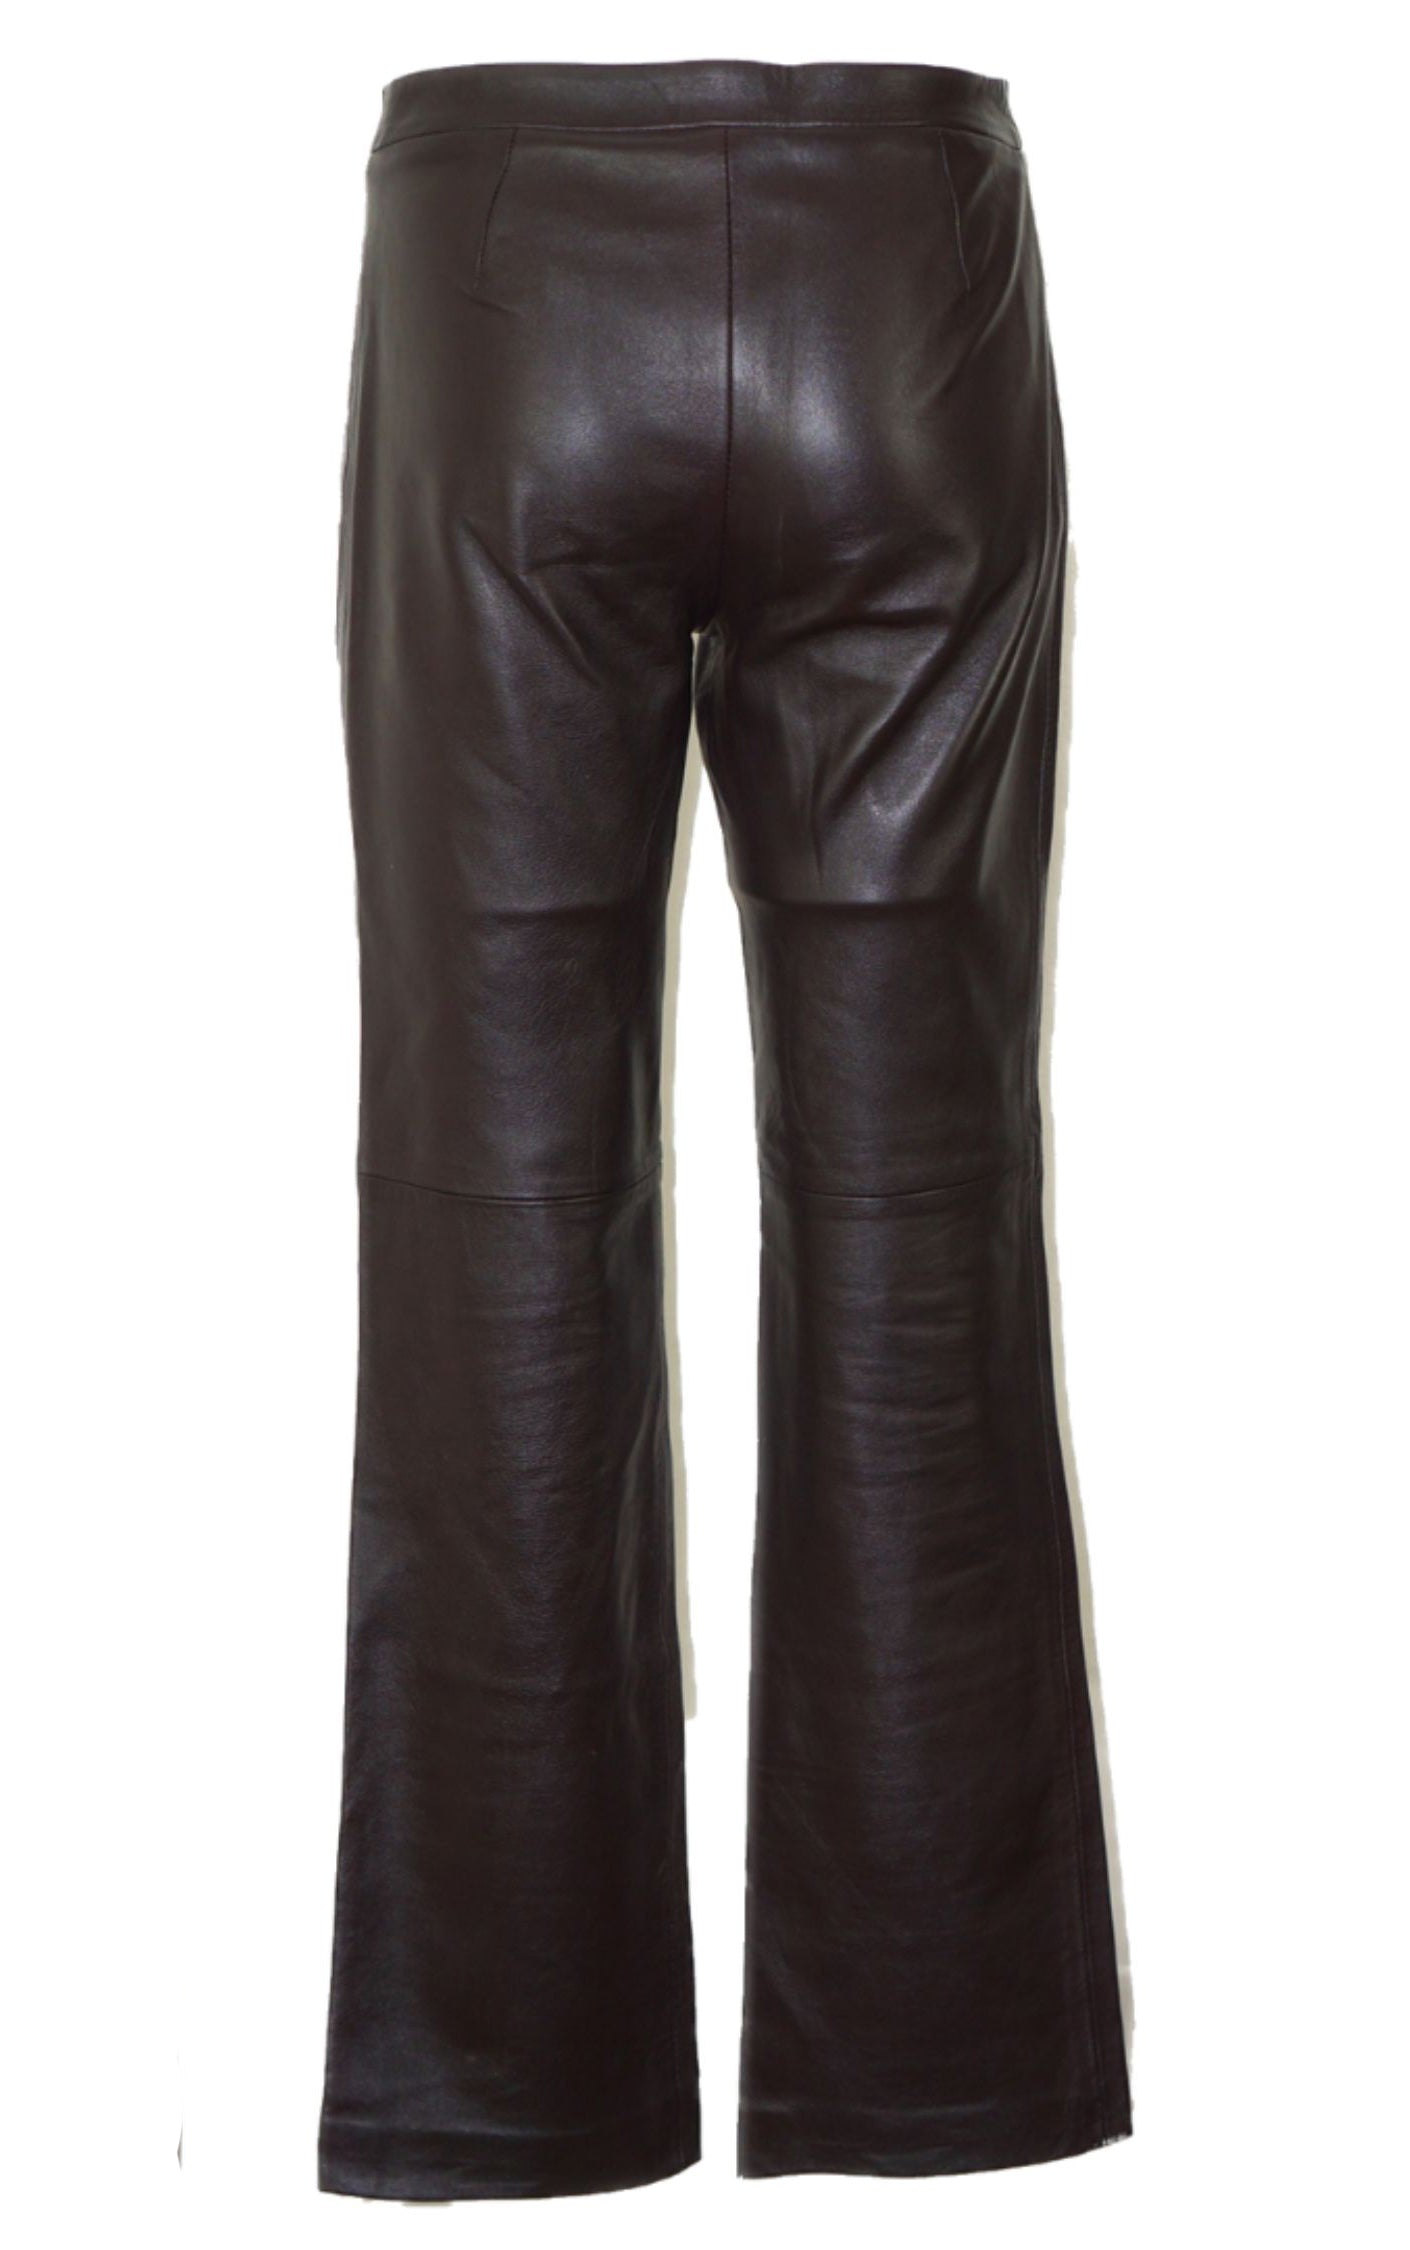 BCBG Real Leather Boot Cut Brown Pants resellum